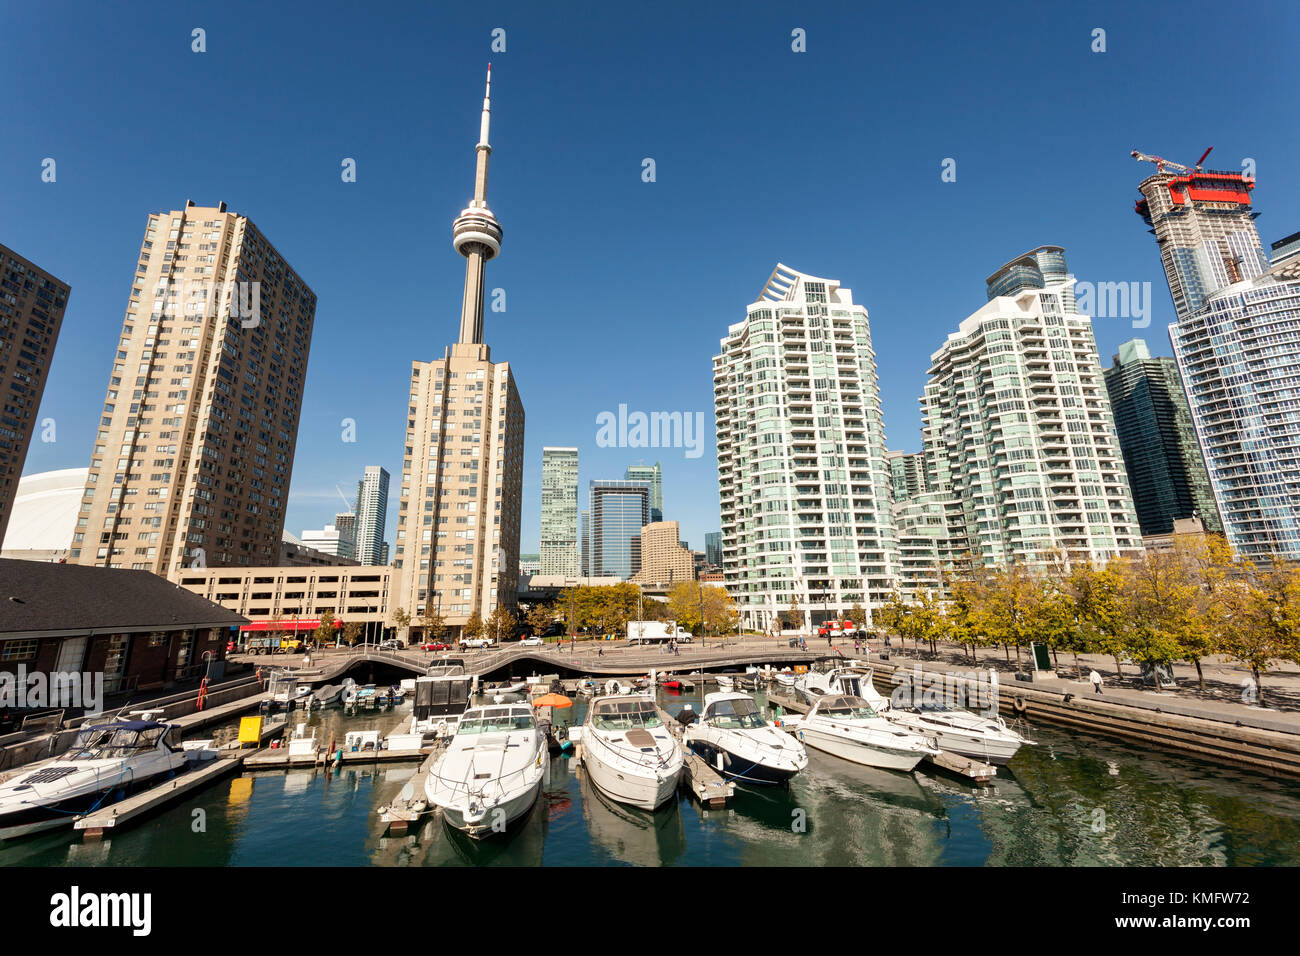 Yachts and boats in the marina downtown of Toronto, Canada Stock Photo